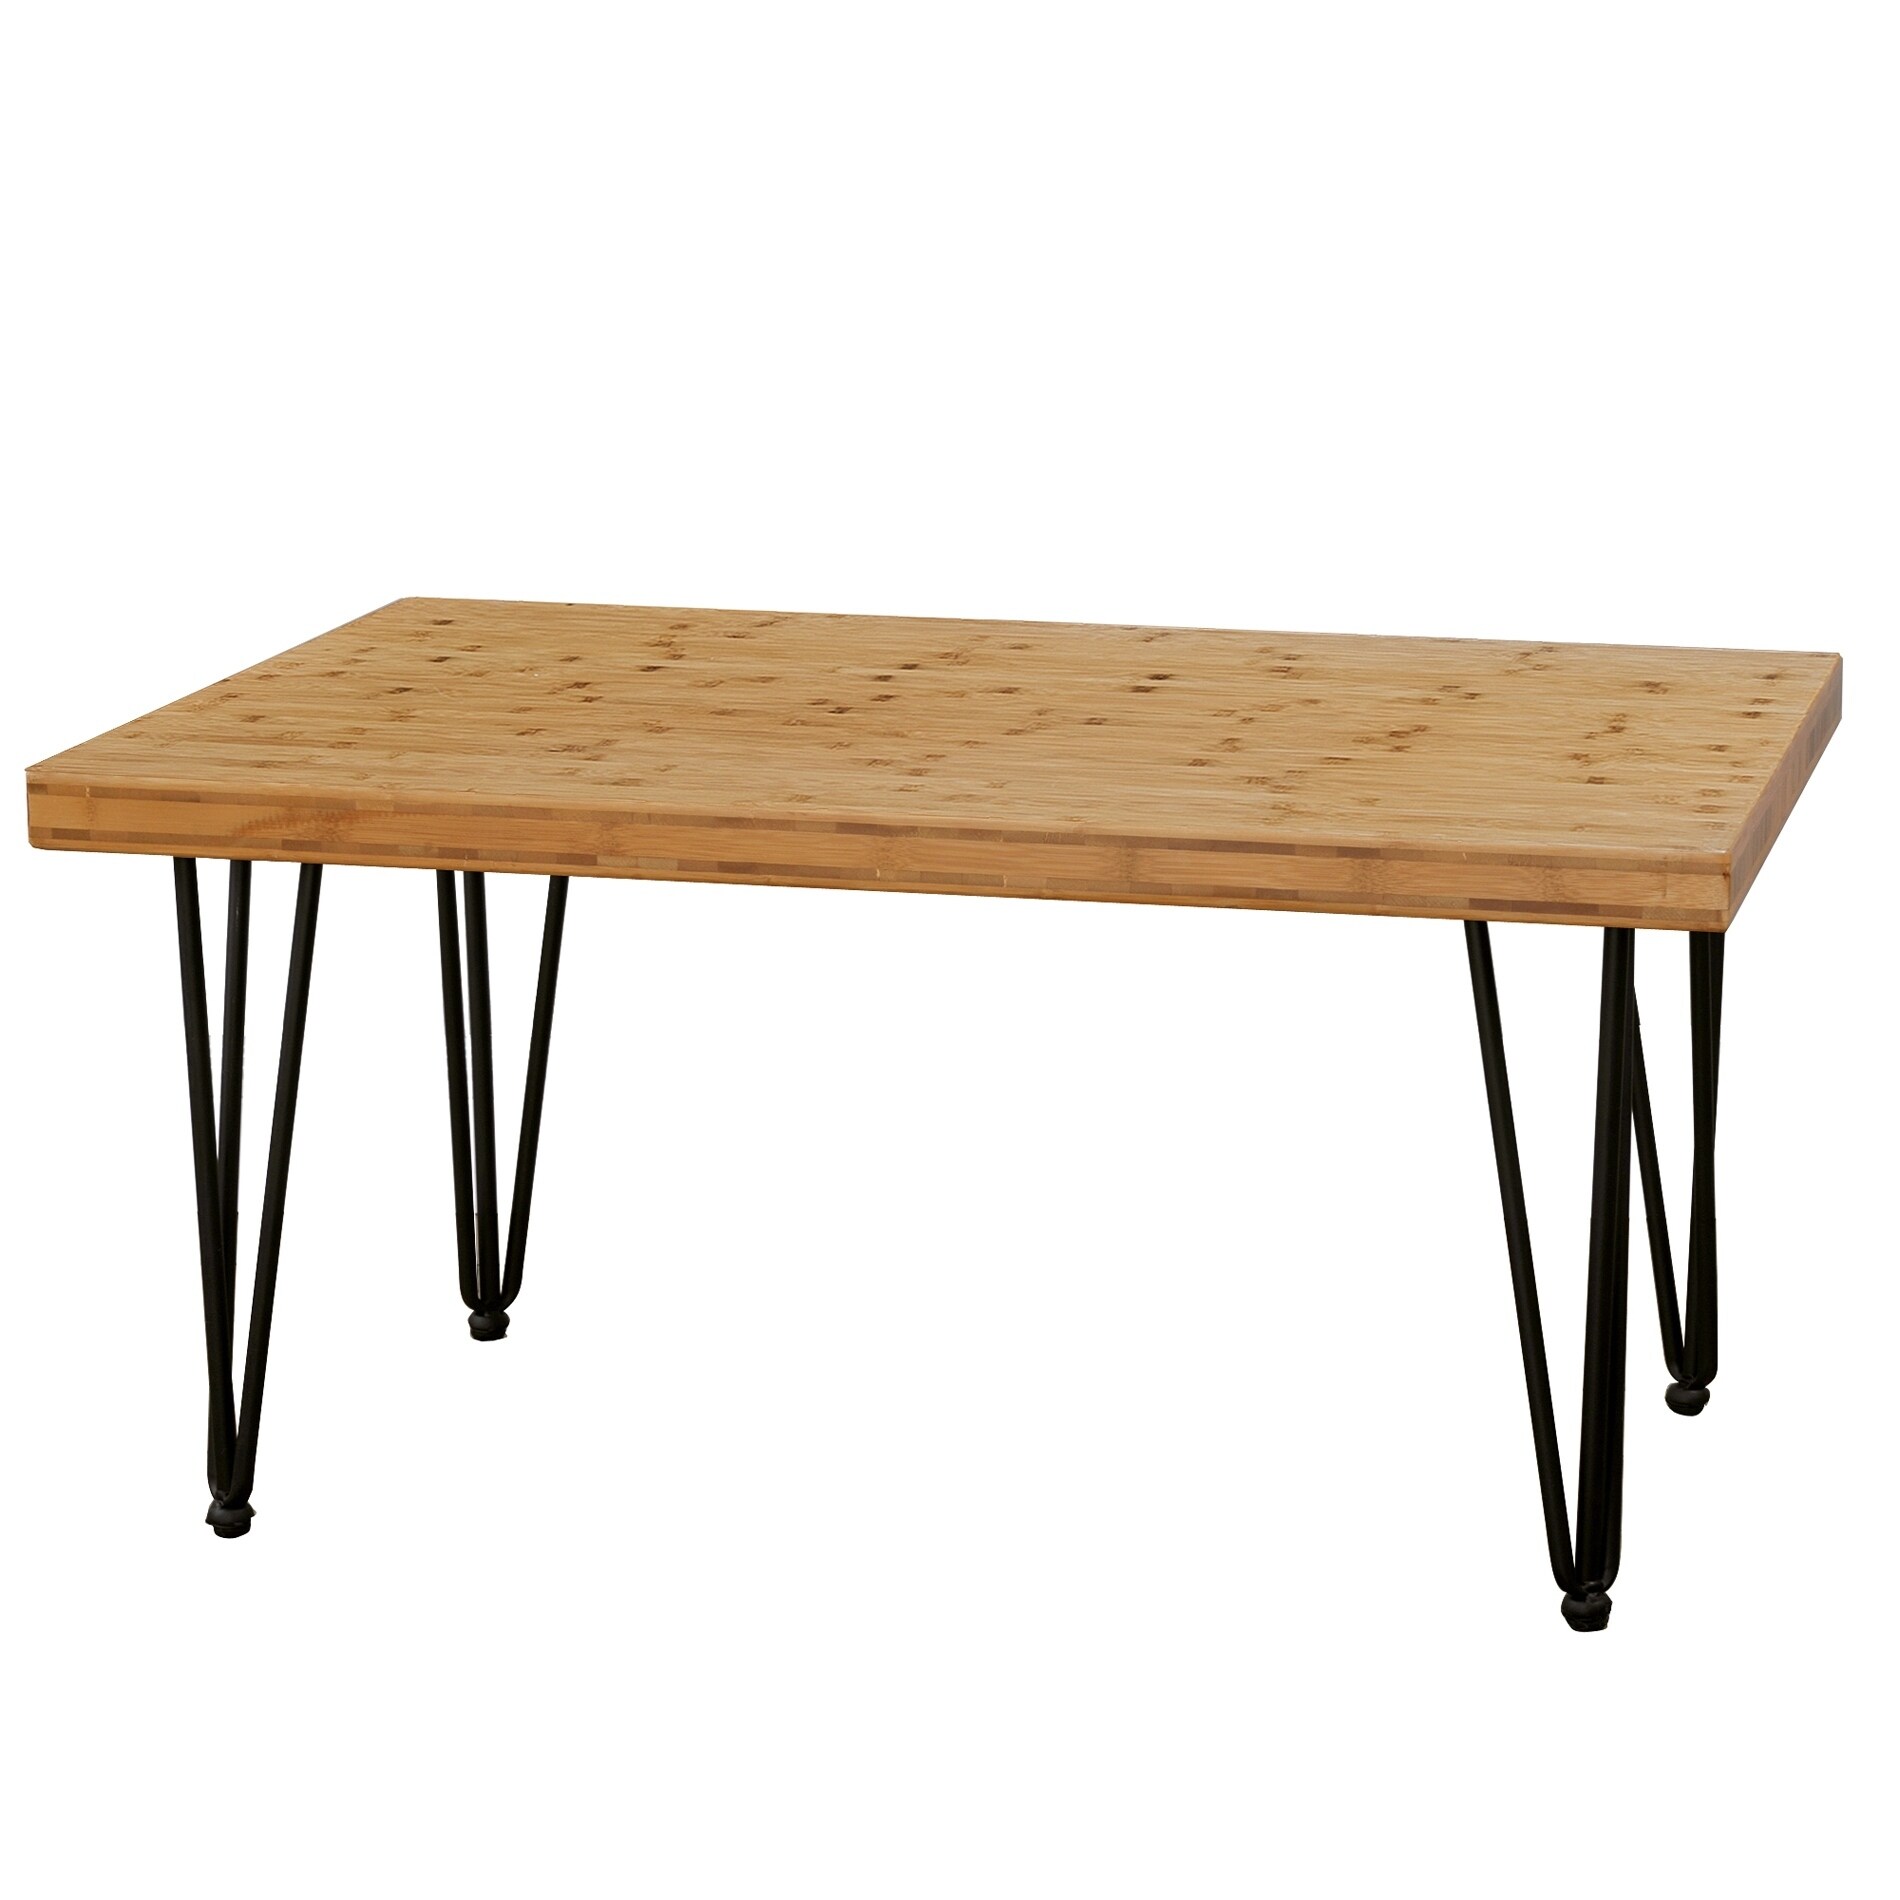 White/Bamboo, 40 Dia x 50cm Legs Wooden Top ASPECT Avery Coffee/Side Table 